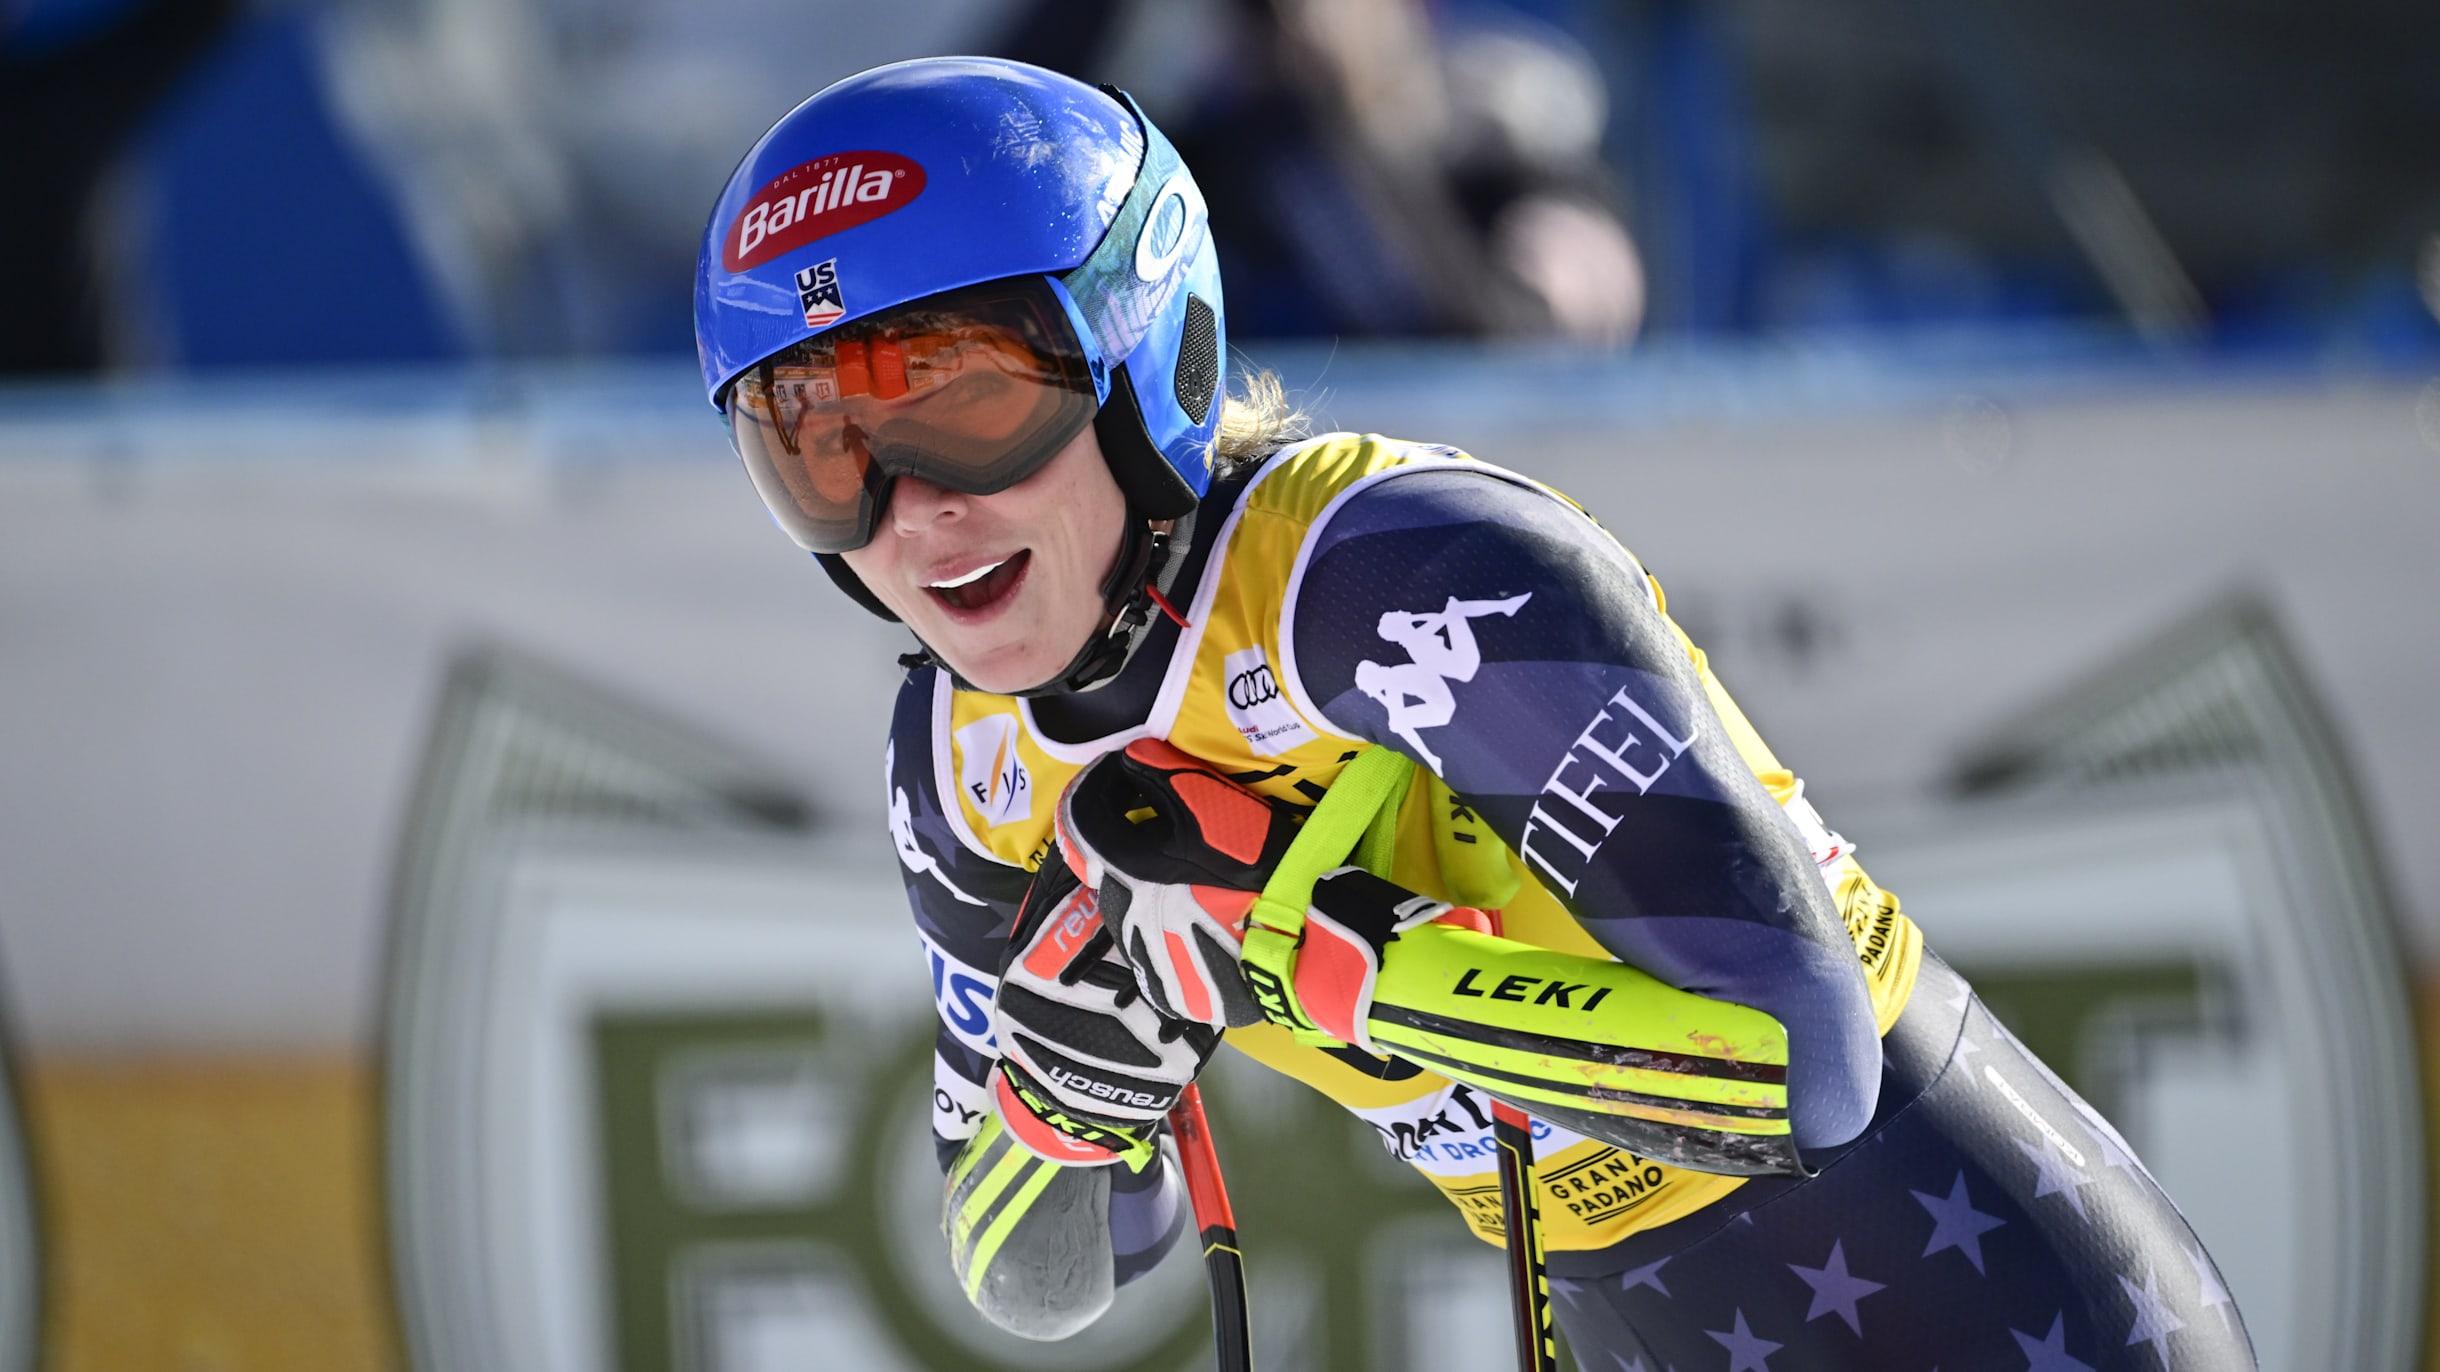 Alpine skiing World Cup How to watch Mikaela Shiffrin chase Ingemar Stenmarks all-time wins record in Kvitfjell